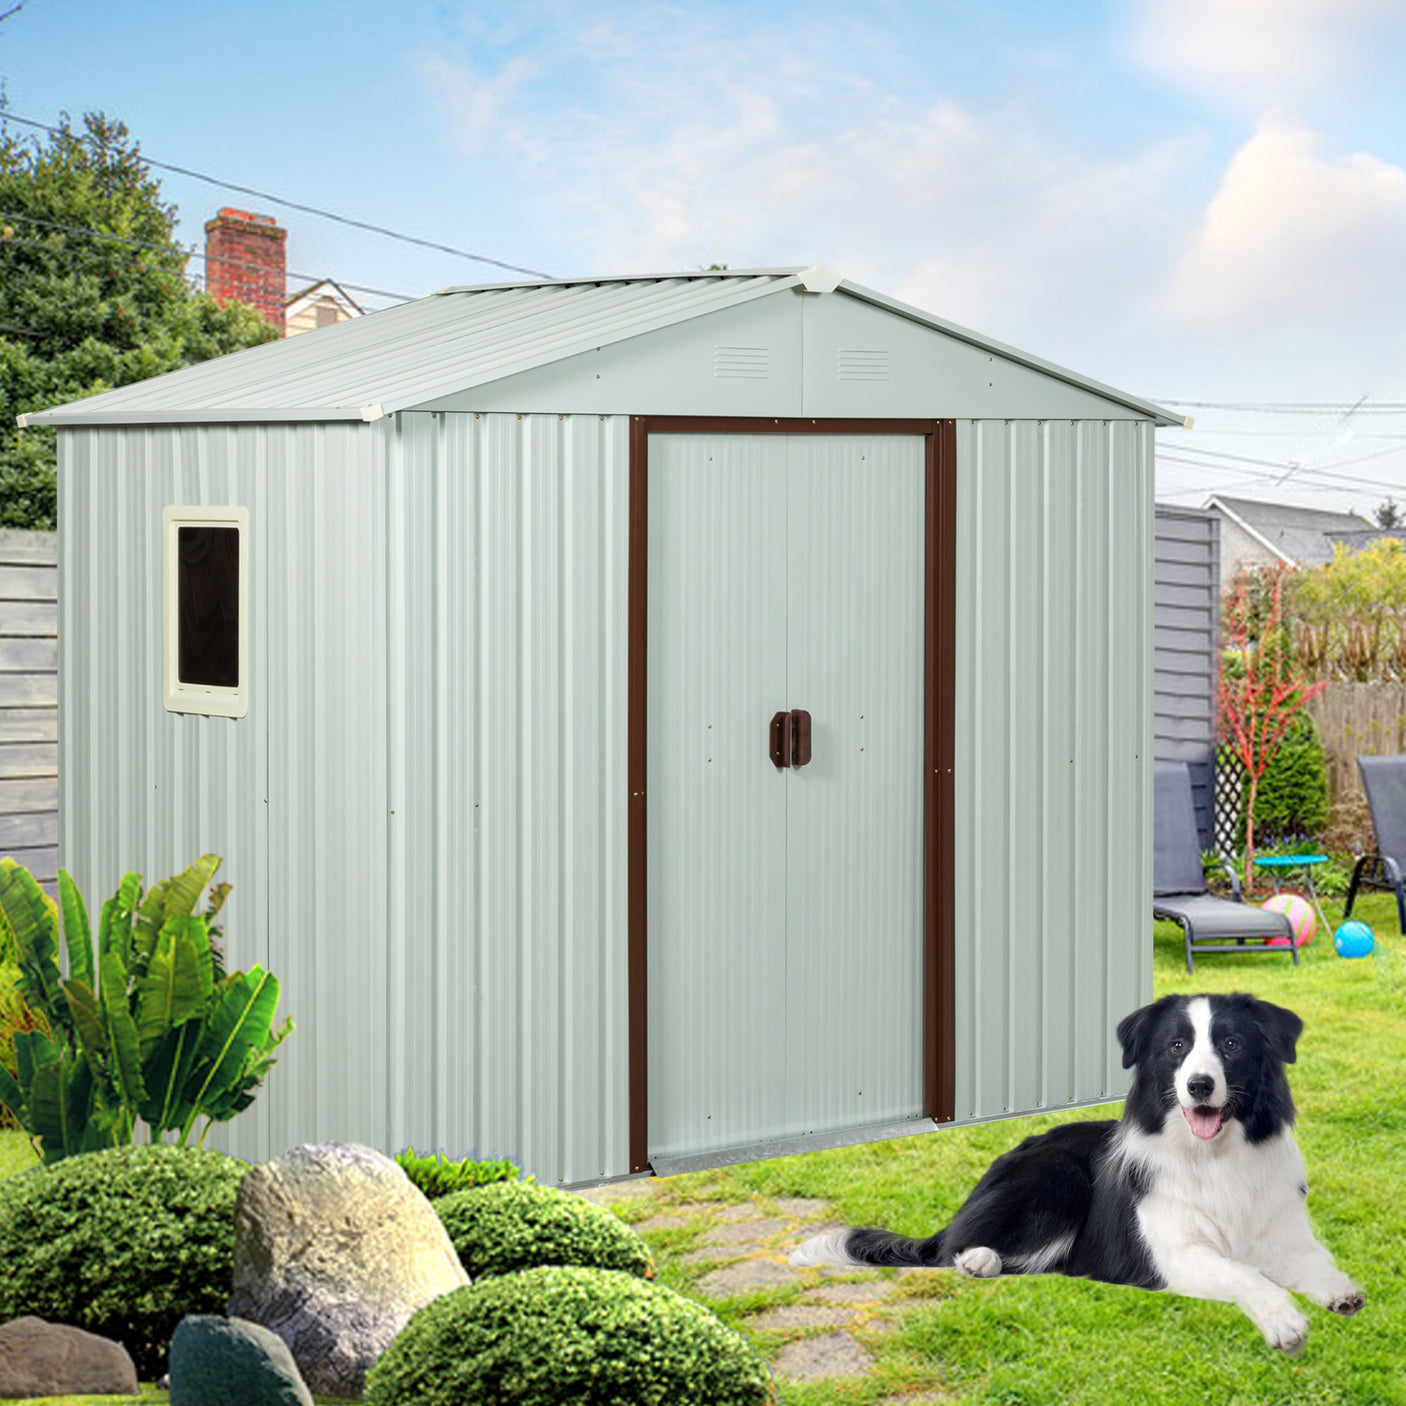 8ft x 4ft Outdoor Metal Storage Shed With window White